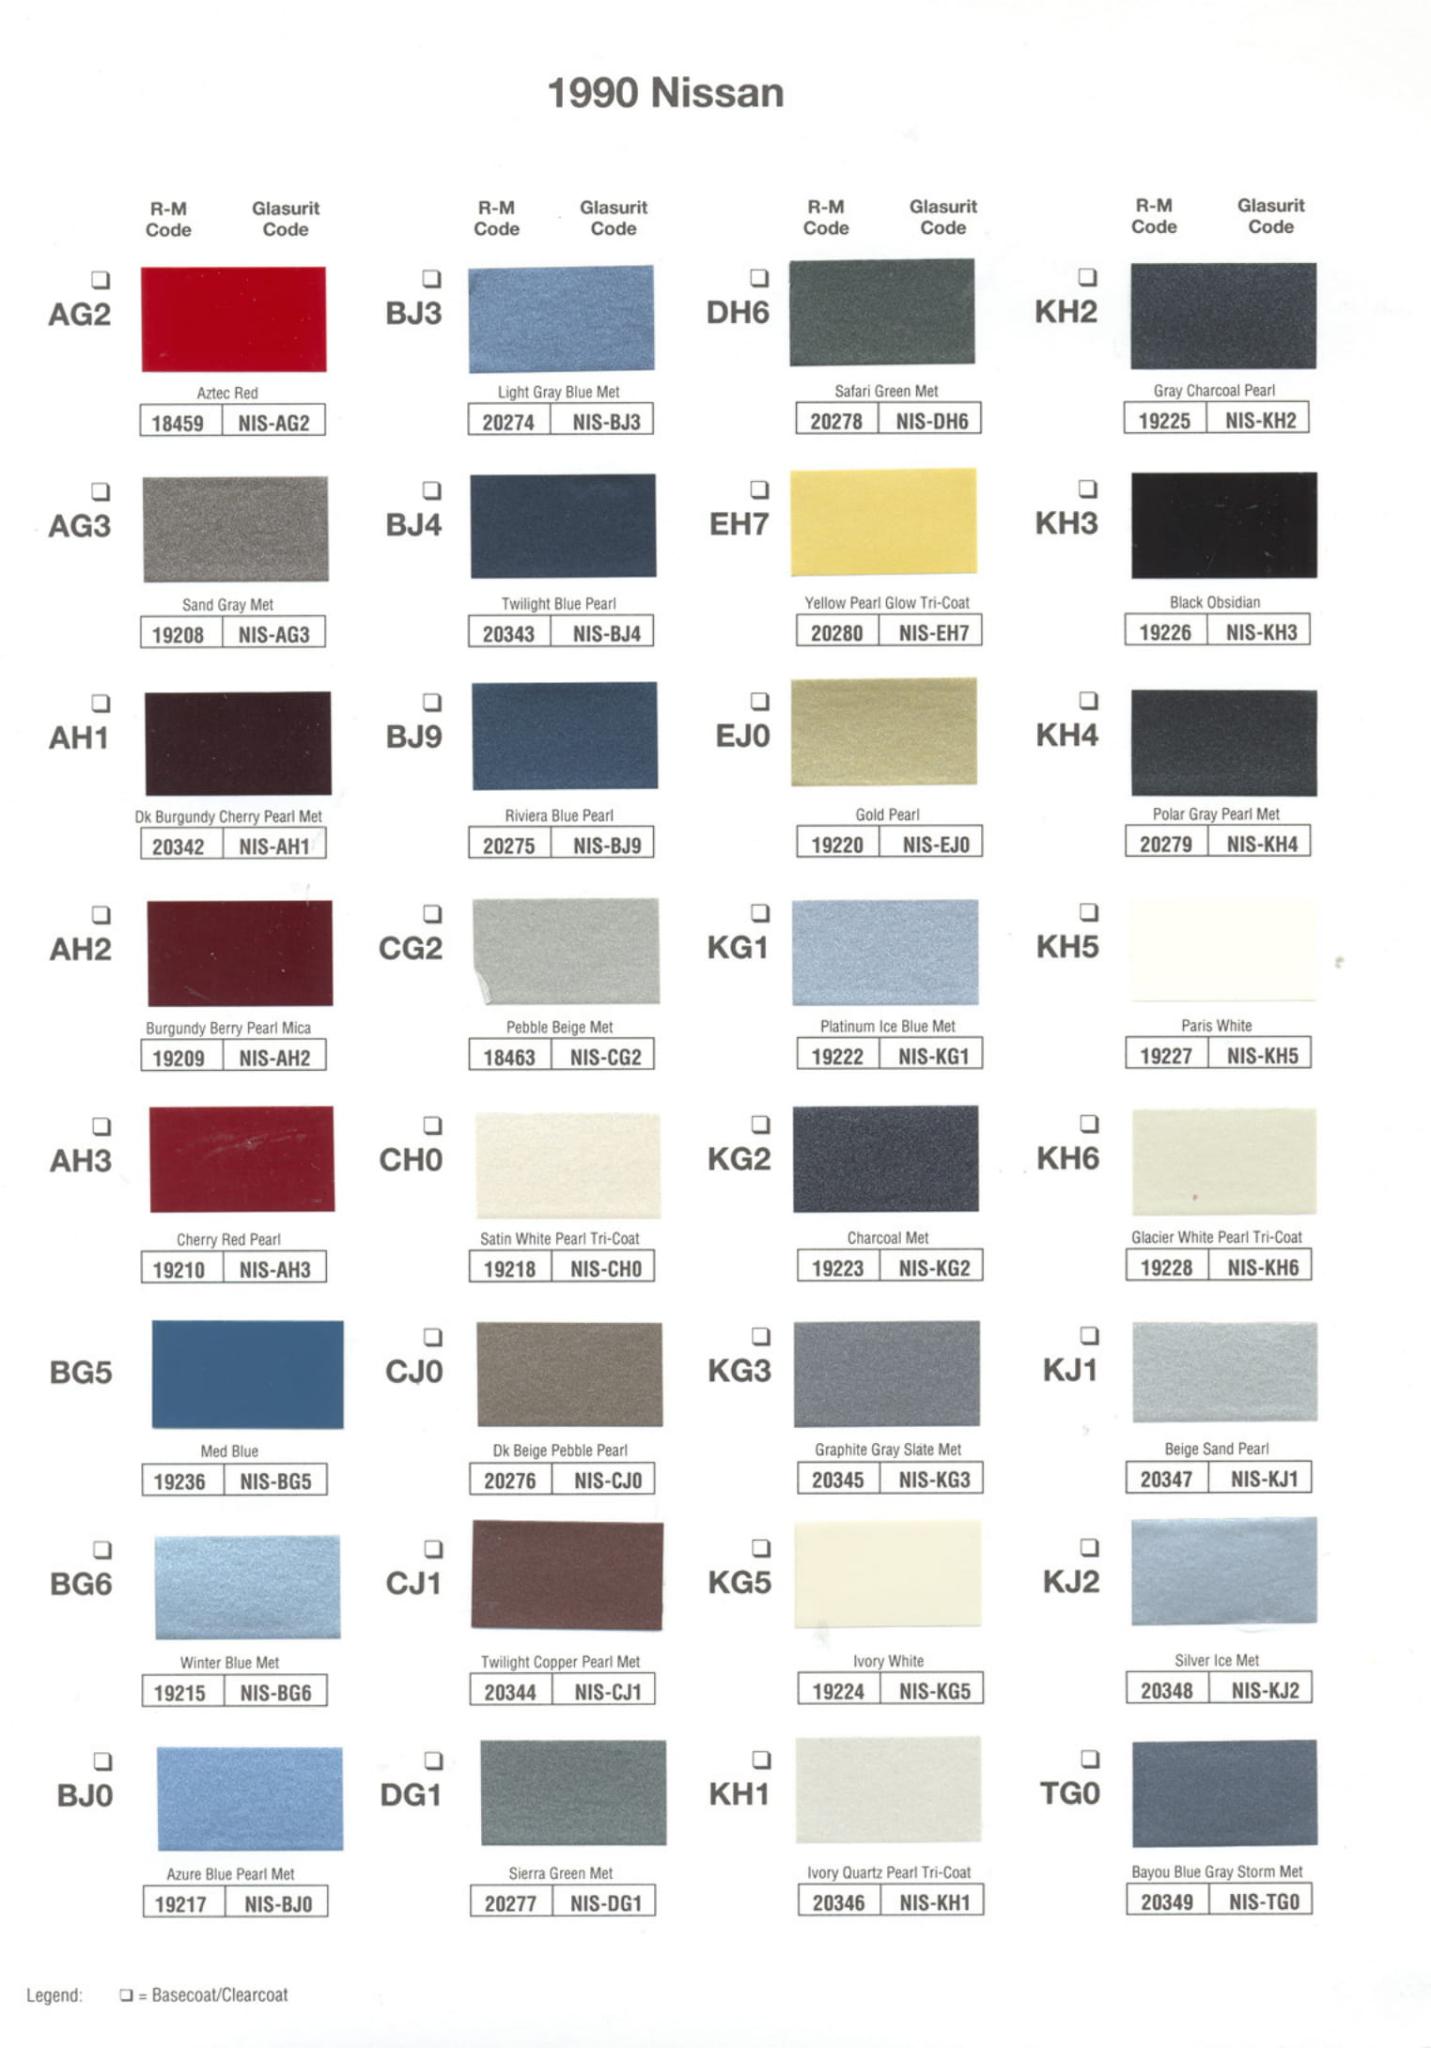 Nissan and Infiniti Paint Codes and Color Chart